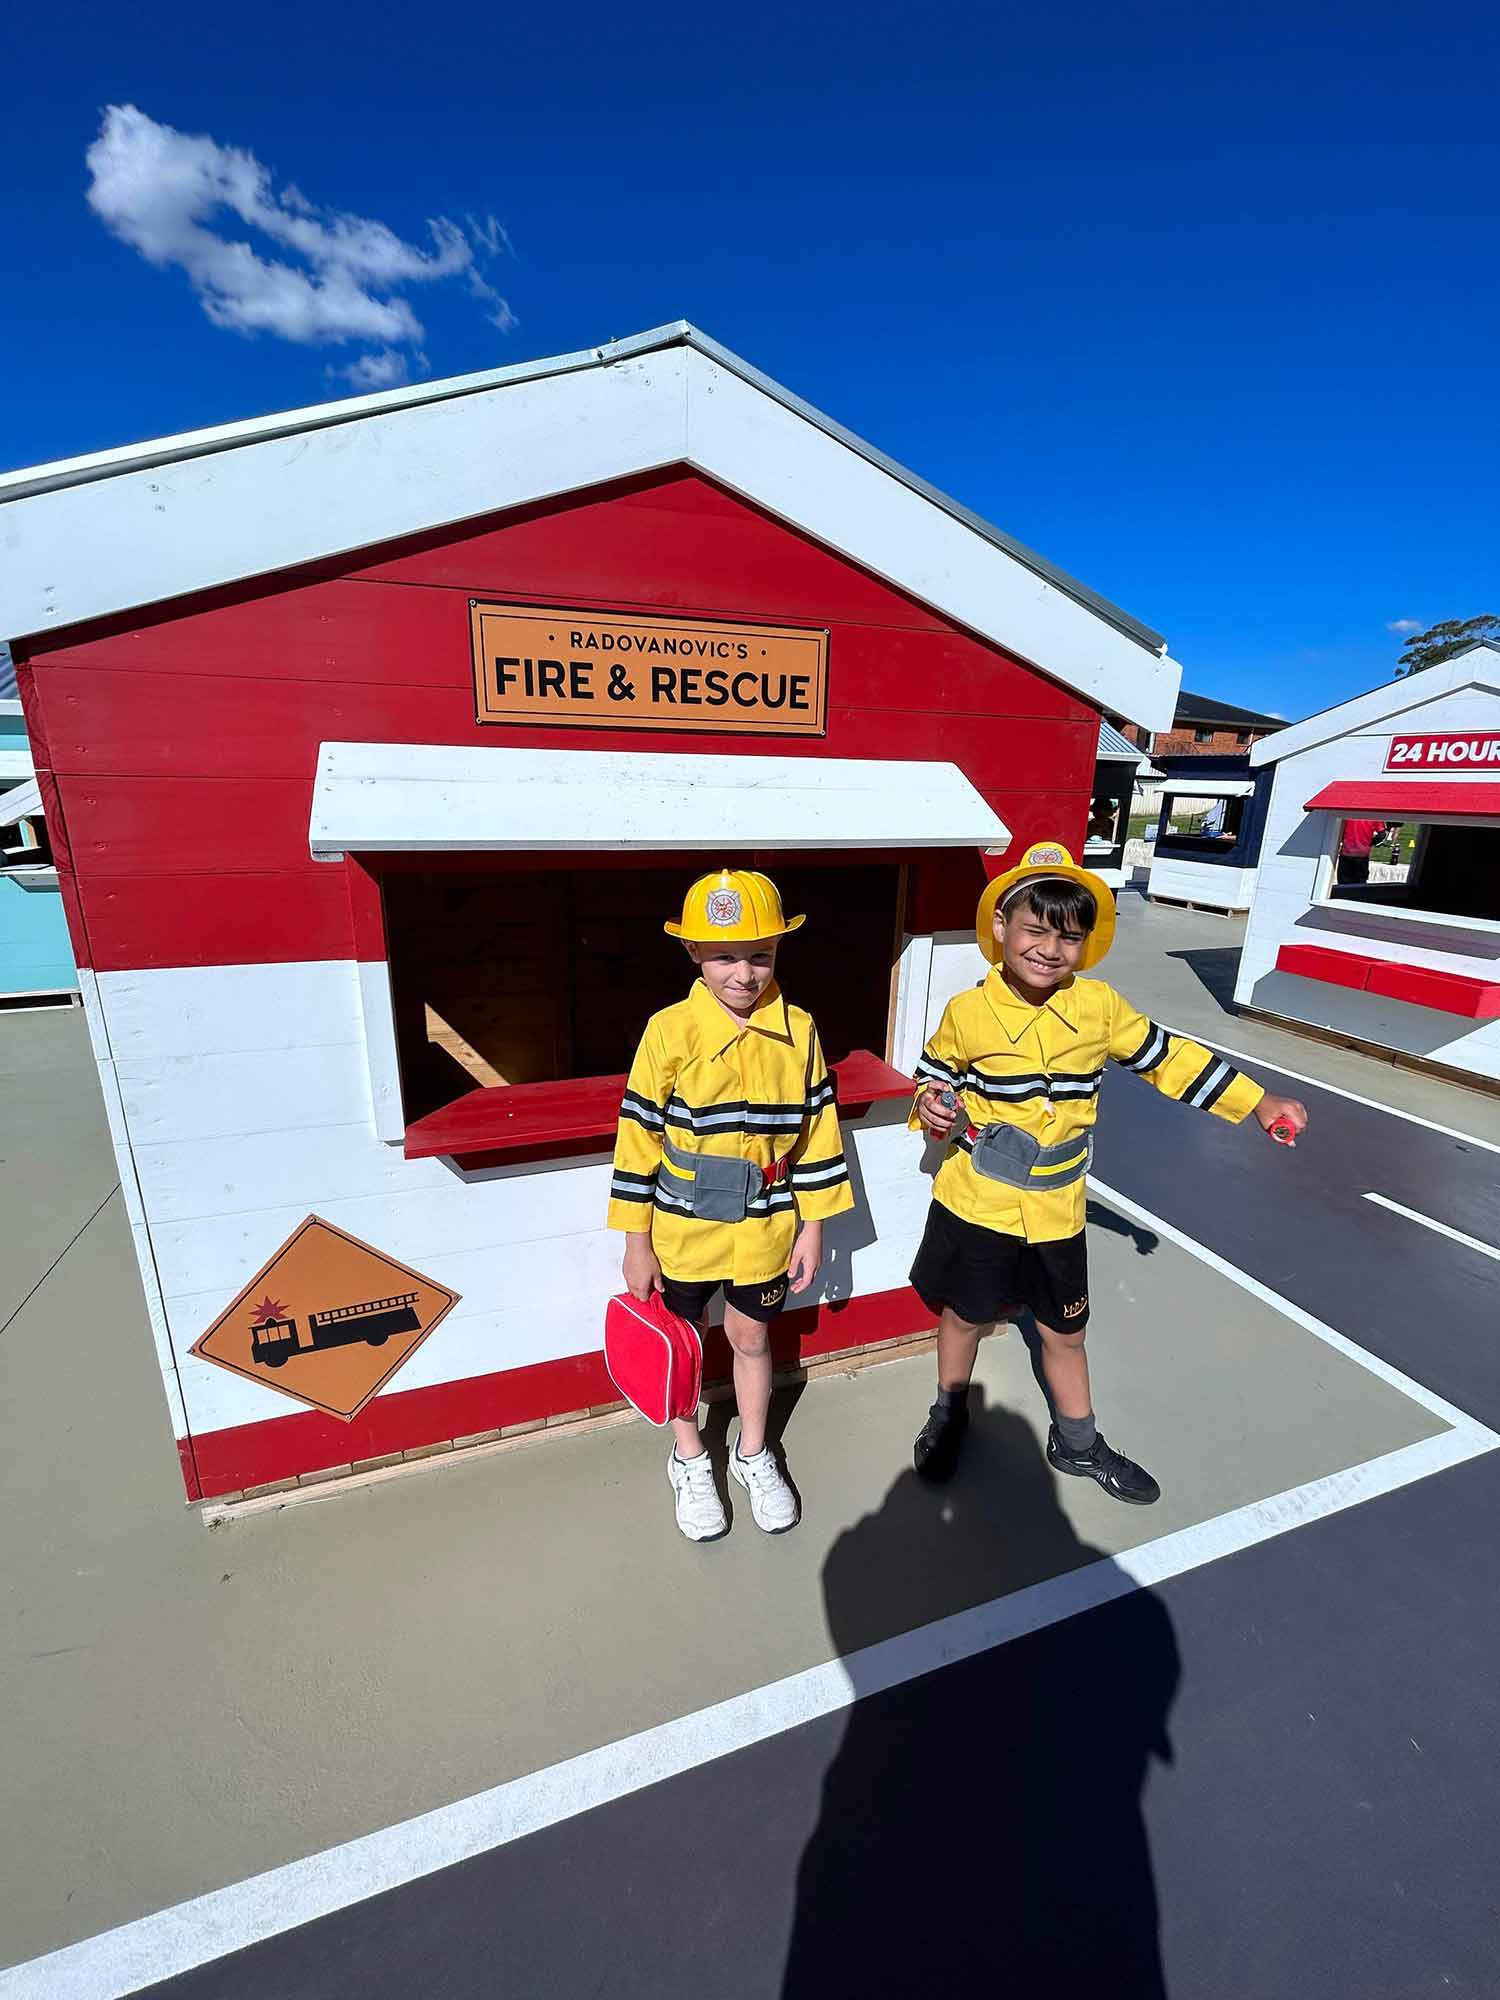 Primary School Fire Station Wooden Cubby House